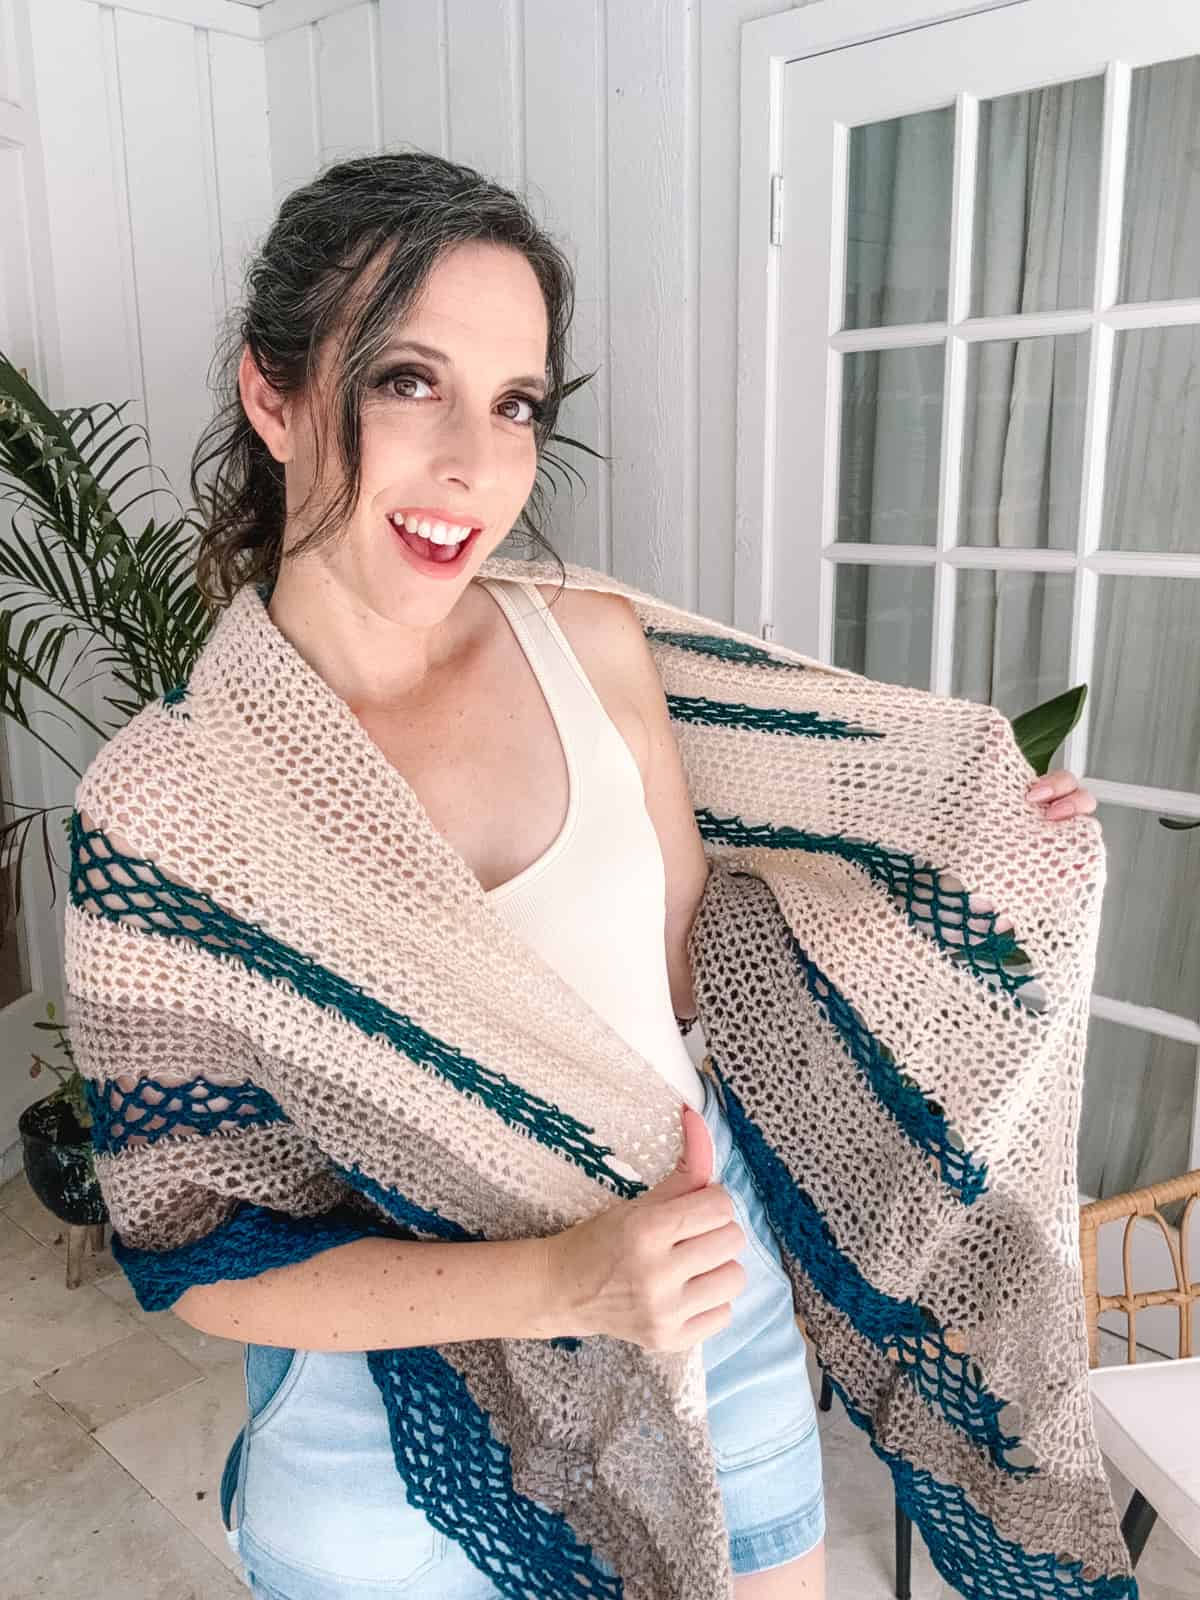 Woman indoors smiling, wearing a light top and shorts, holding an open Fisherman's Wharf Crochet Shawl adorned with blue and beige patterns.